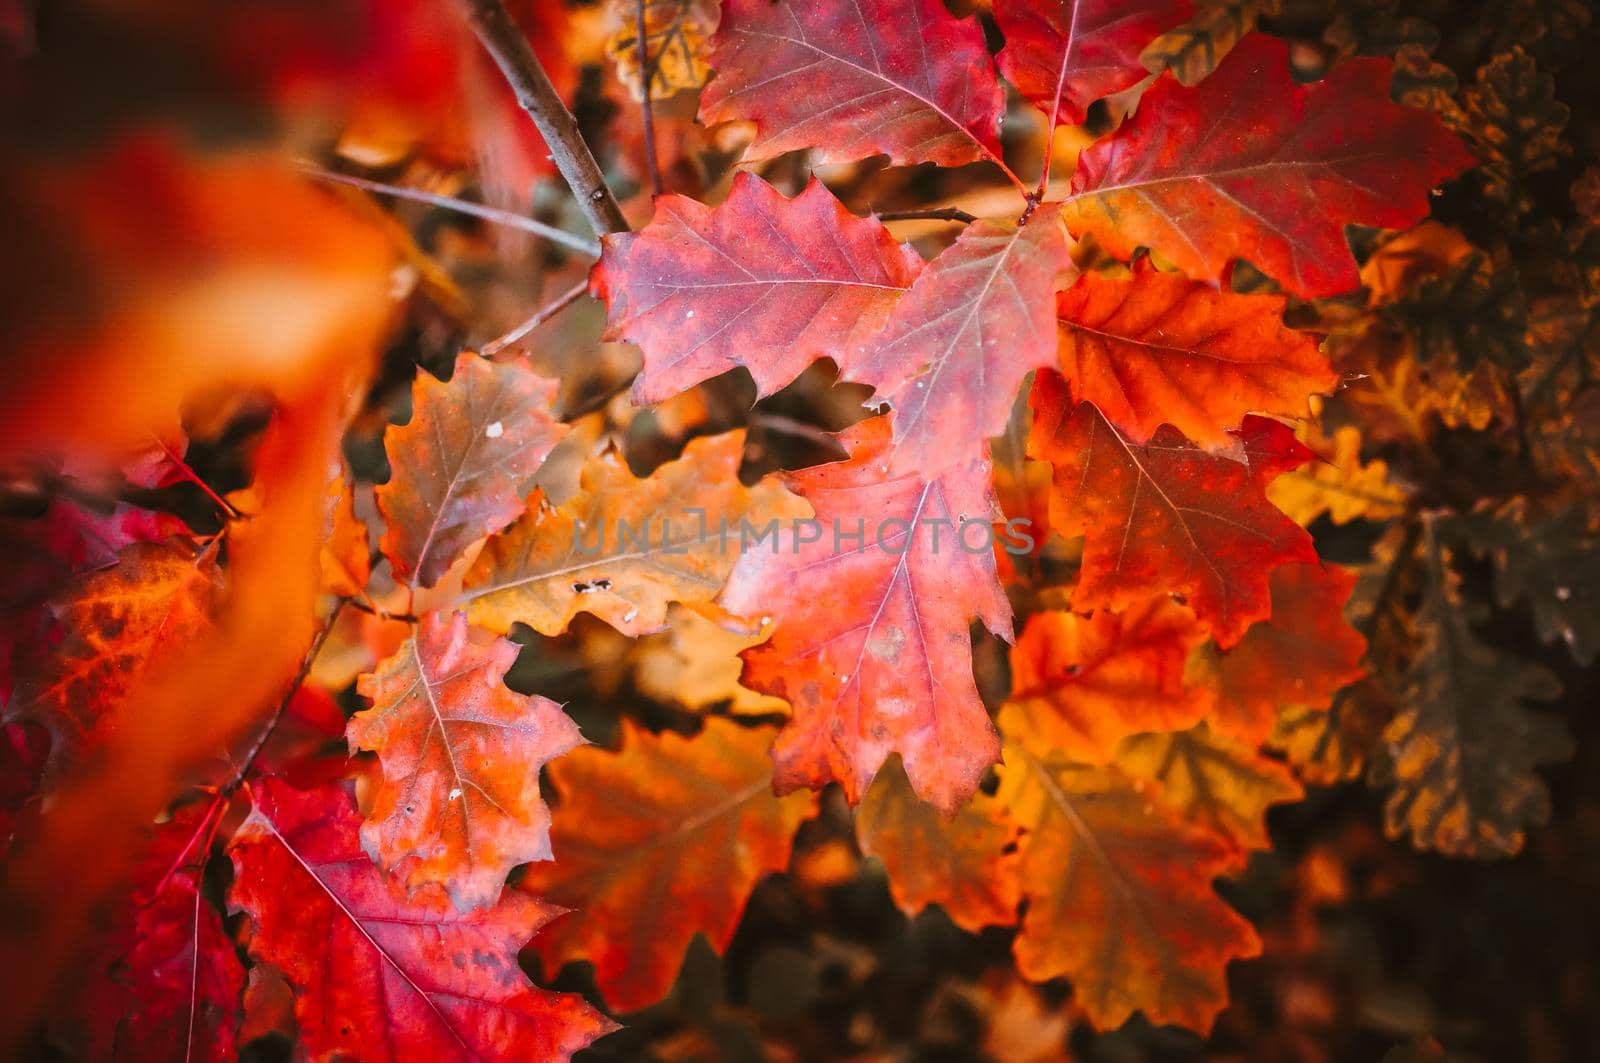 Autumn landscape background. Red autumn oak leaves in a young forest early in the morning at sunrise. Fallen Leaf Season Concept by Alla_Morozova93